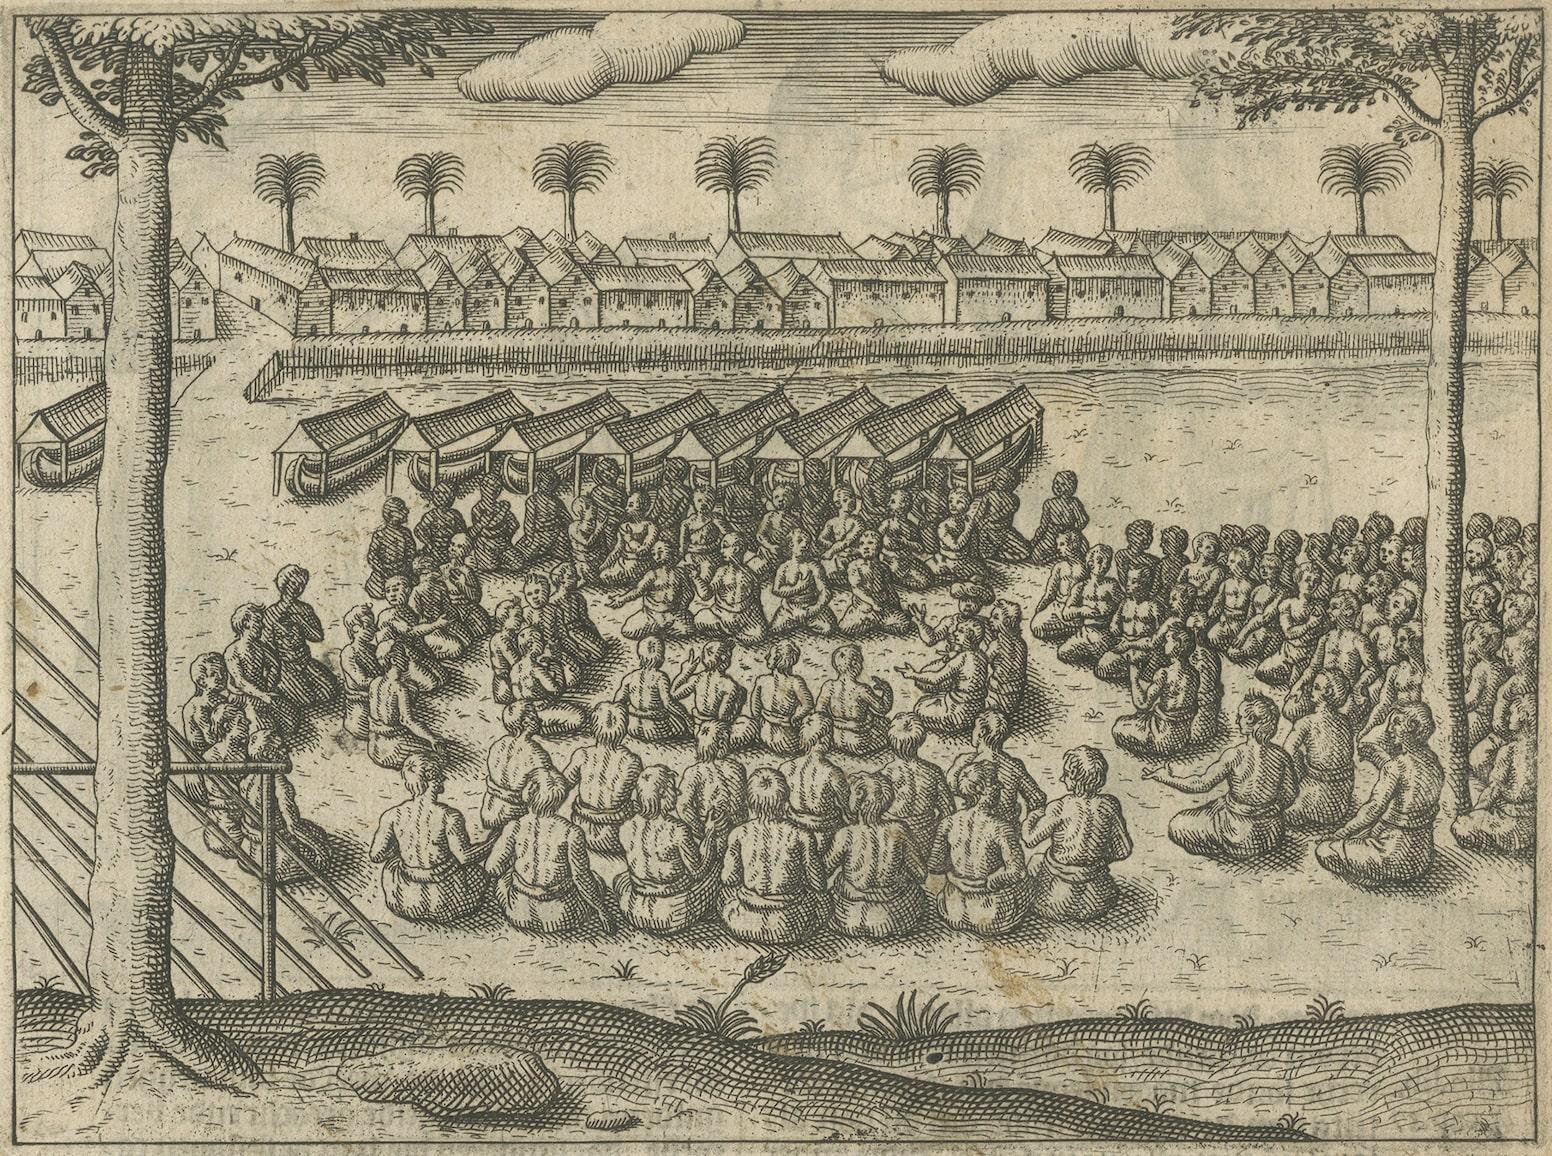 Paper Rare Engravings of Council of War in Bantam and Javanese Local Traders, 1614 For Sale